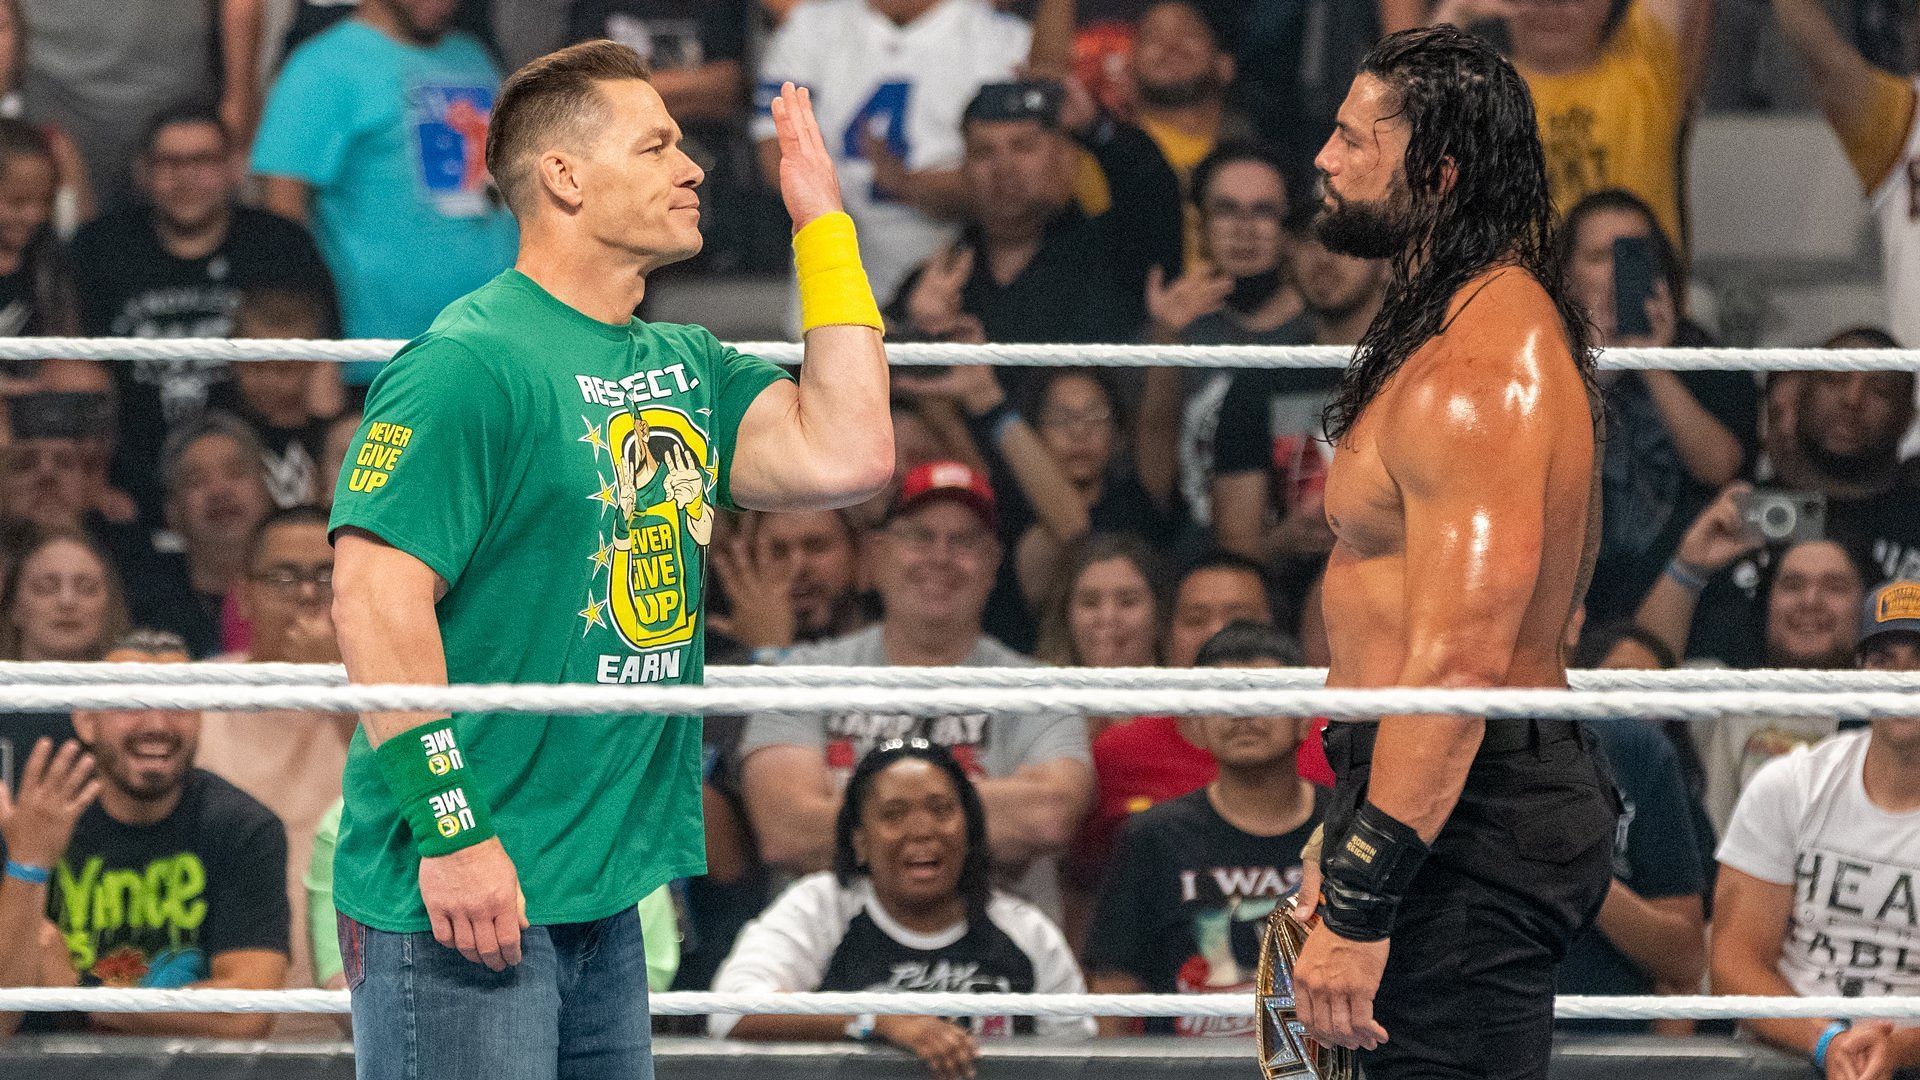 Cena and Roman Reigns